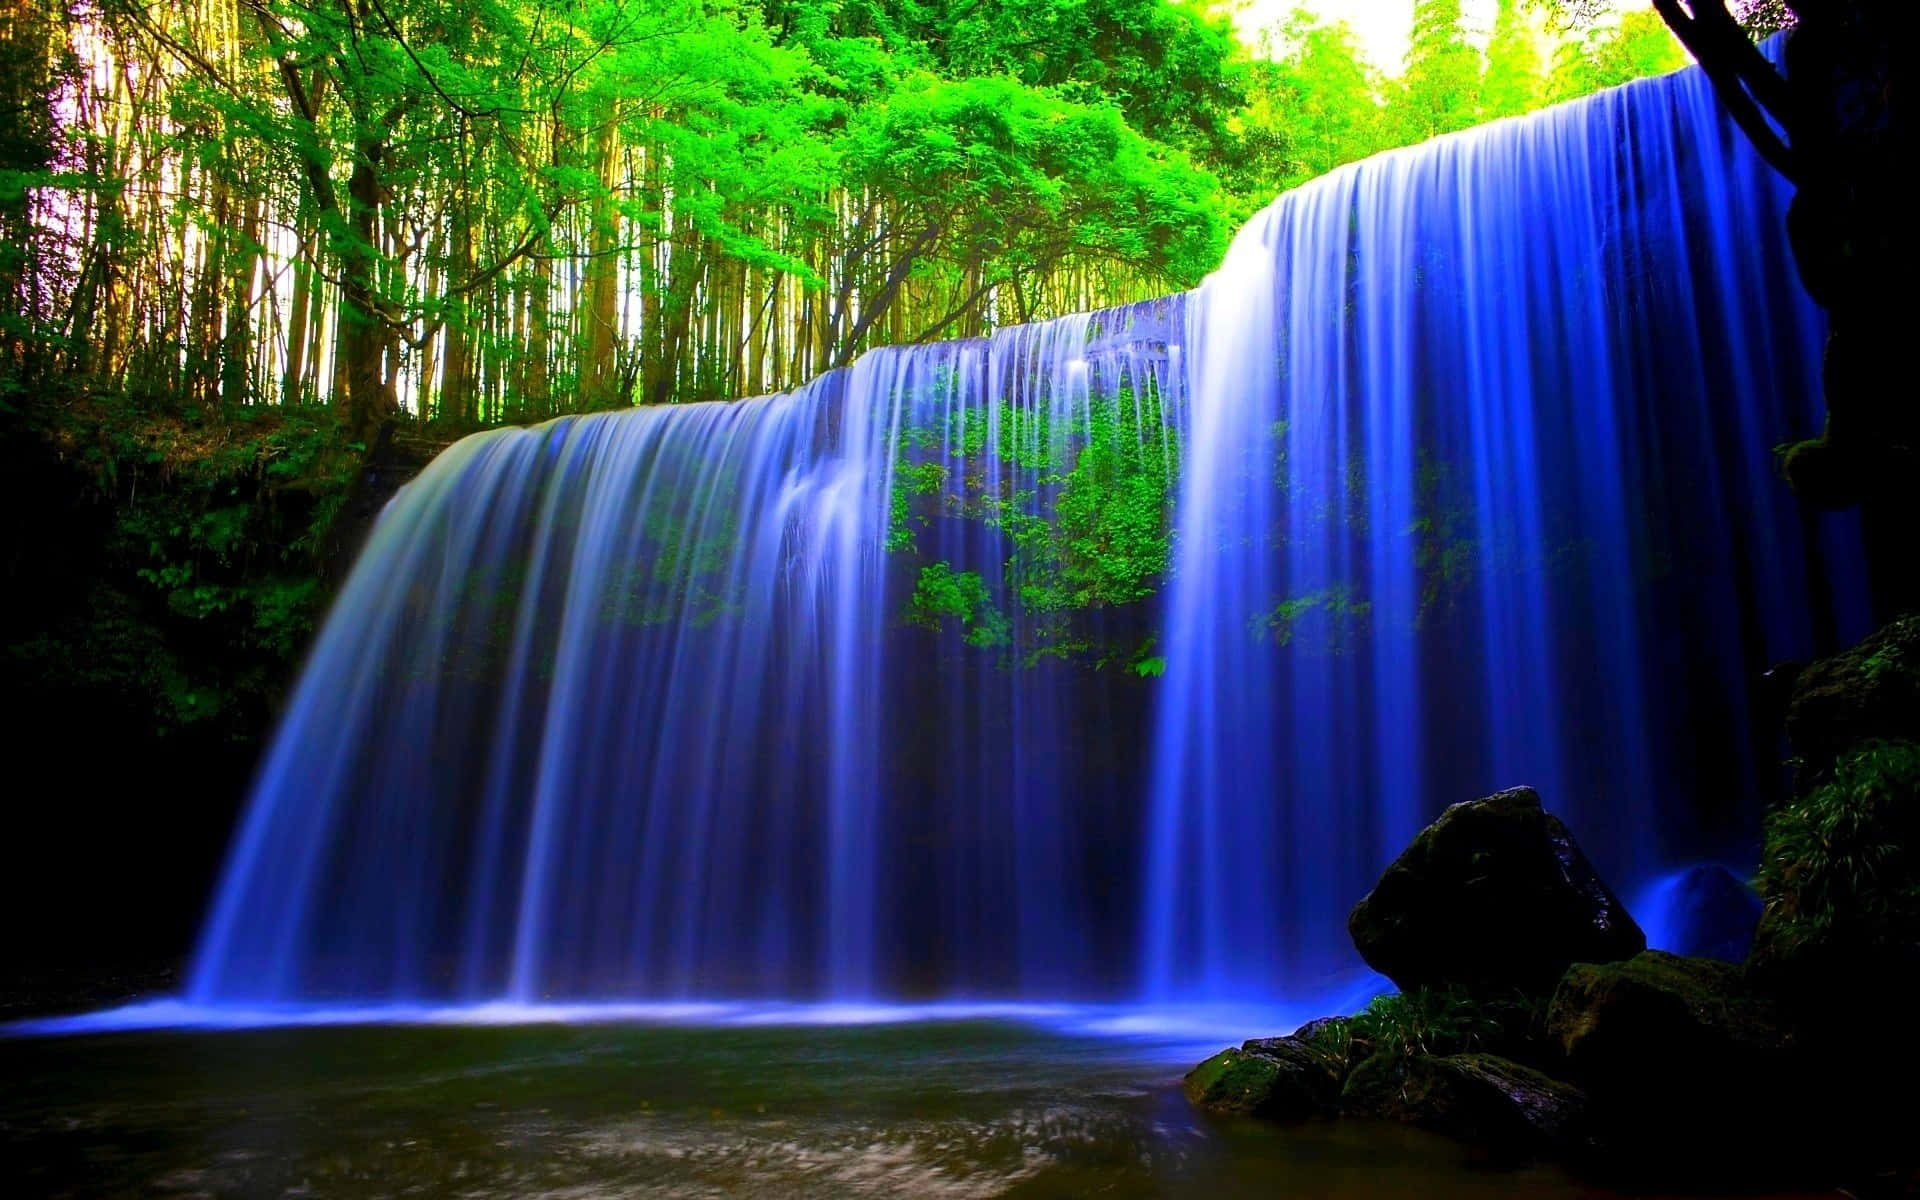 Take in the beauty of nature at this gorgeous Waterfall!